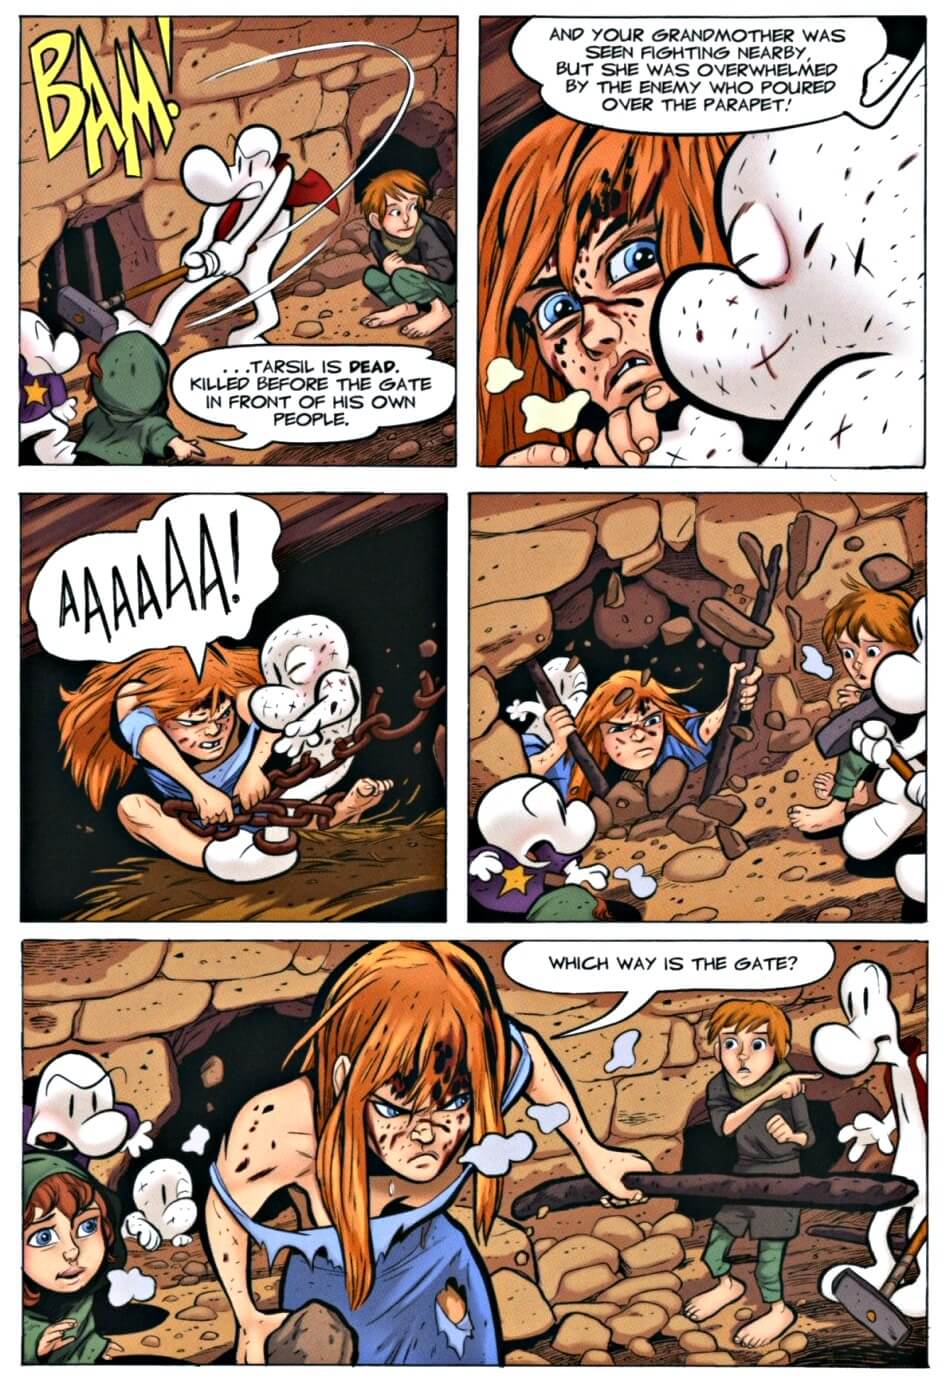 page 45 chapter 1 of bone 9 crown of horns graphic novel